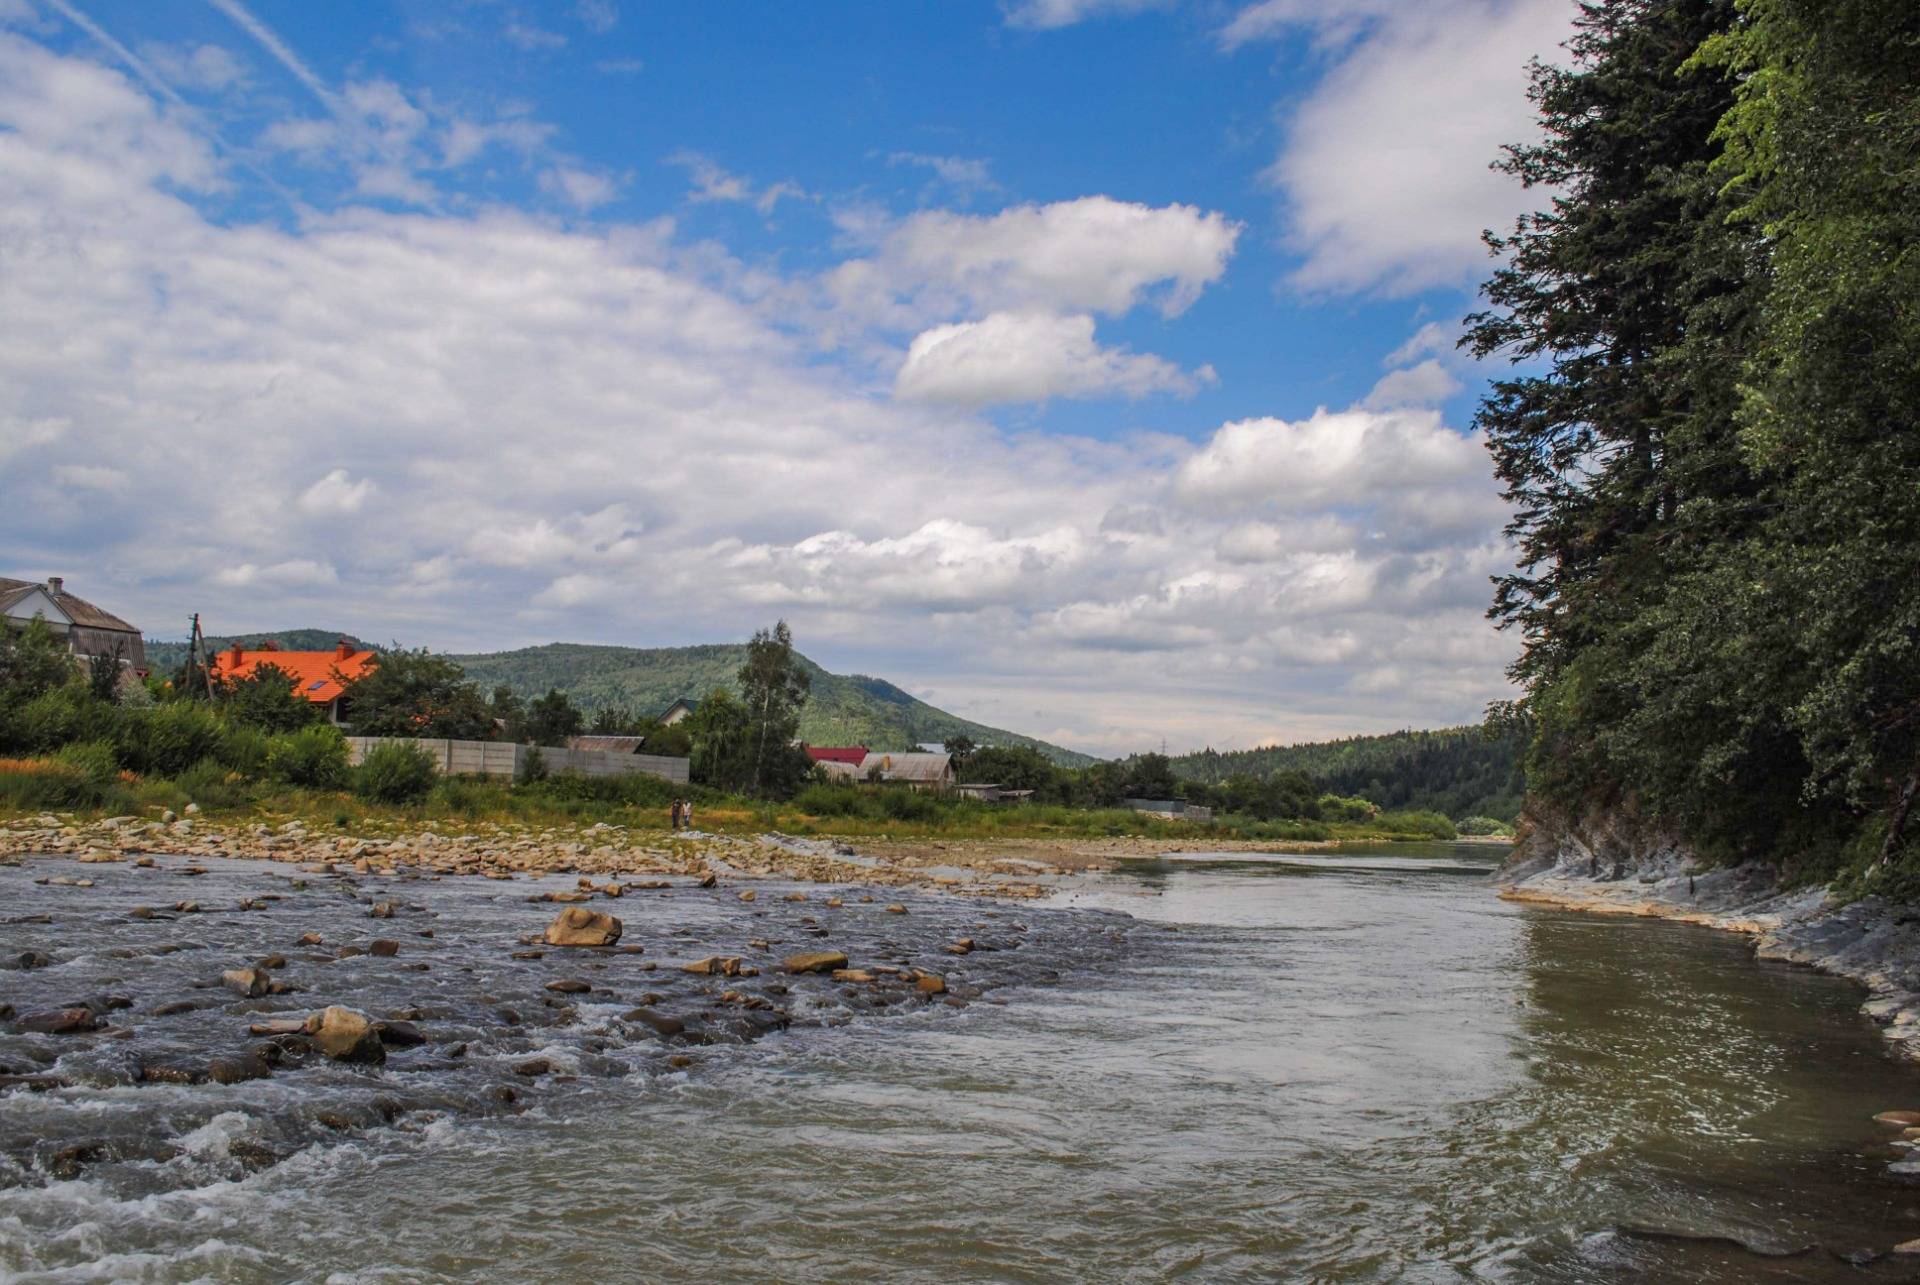 My rest in the Carpathian village Oryavchyk. On the river bank